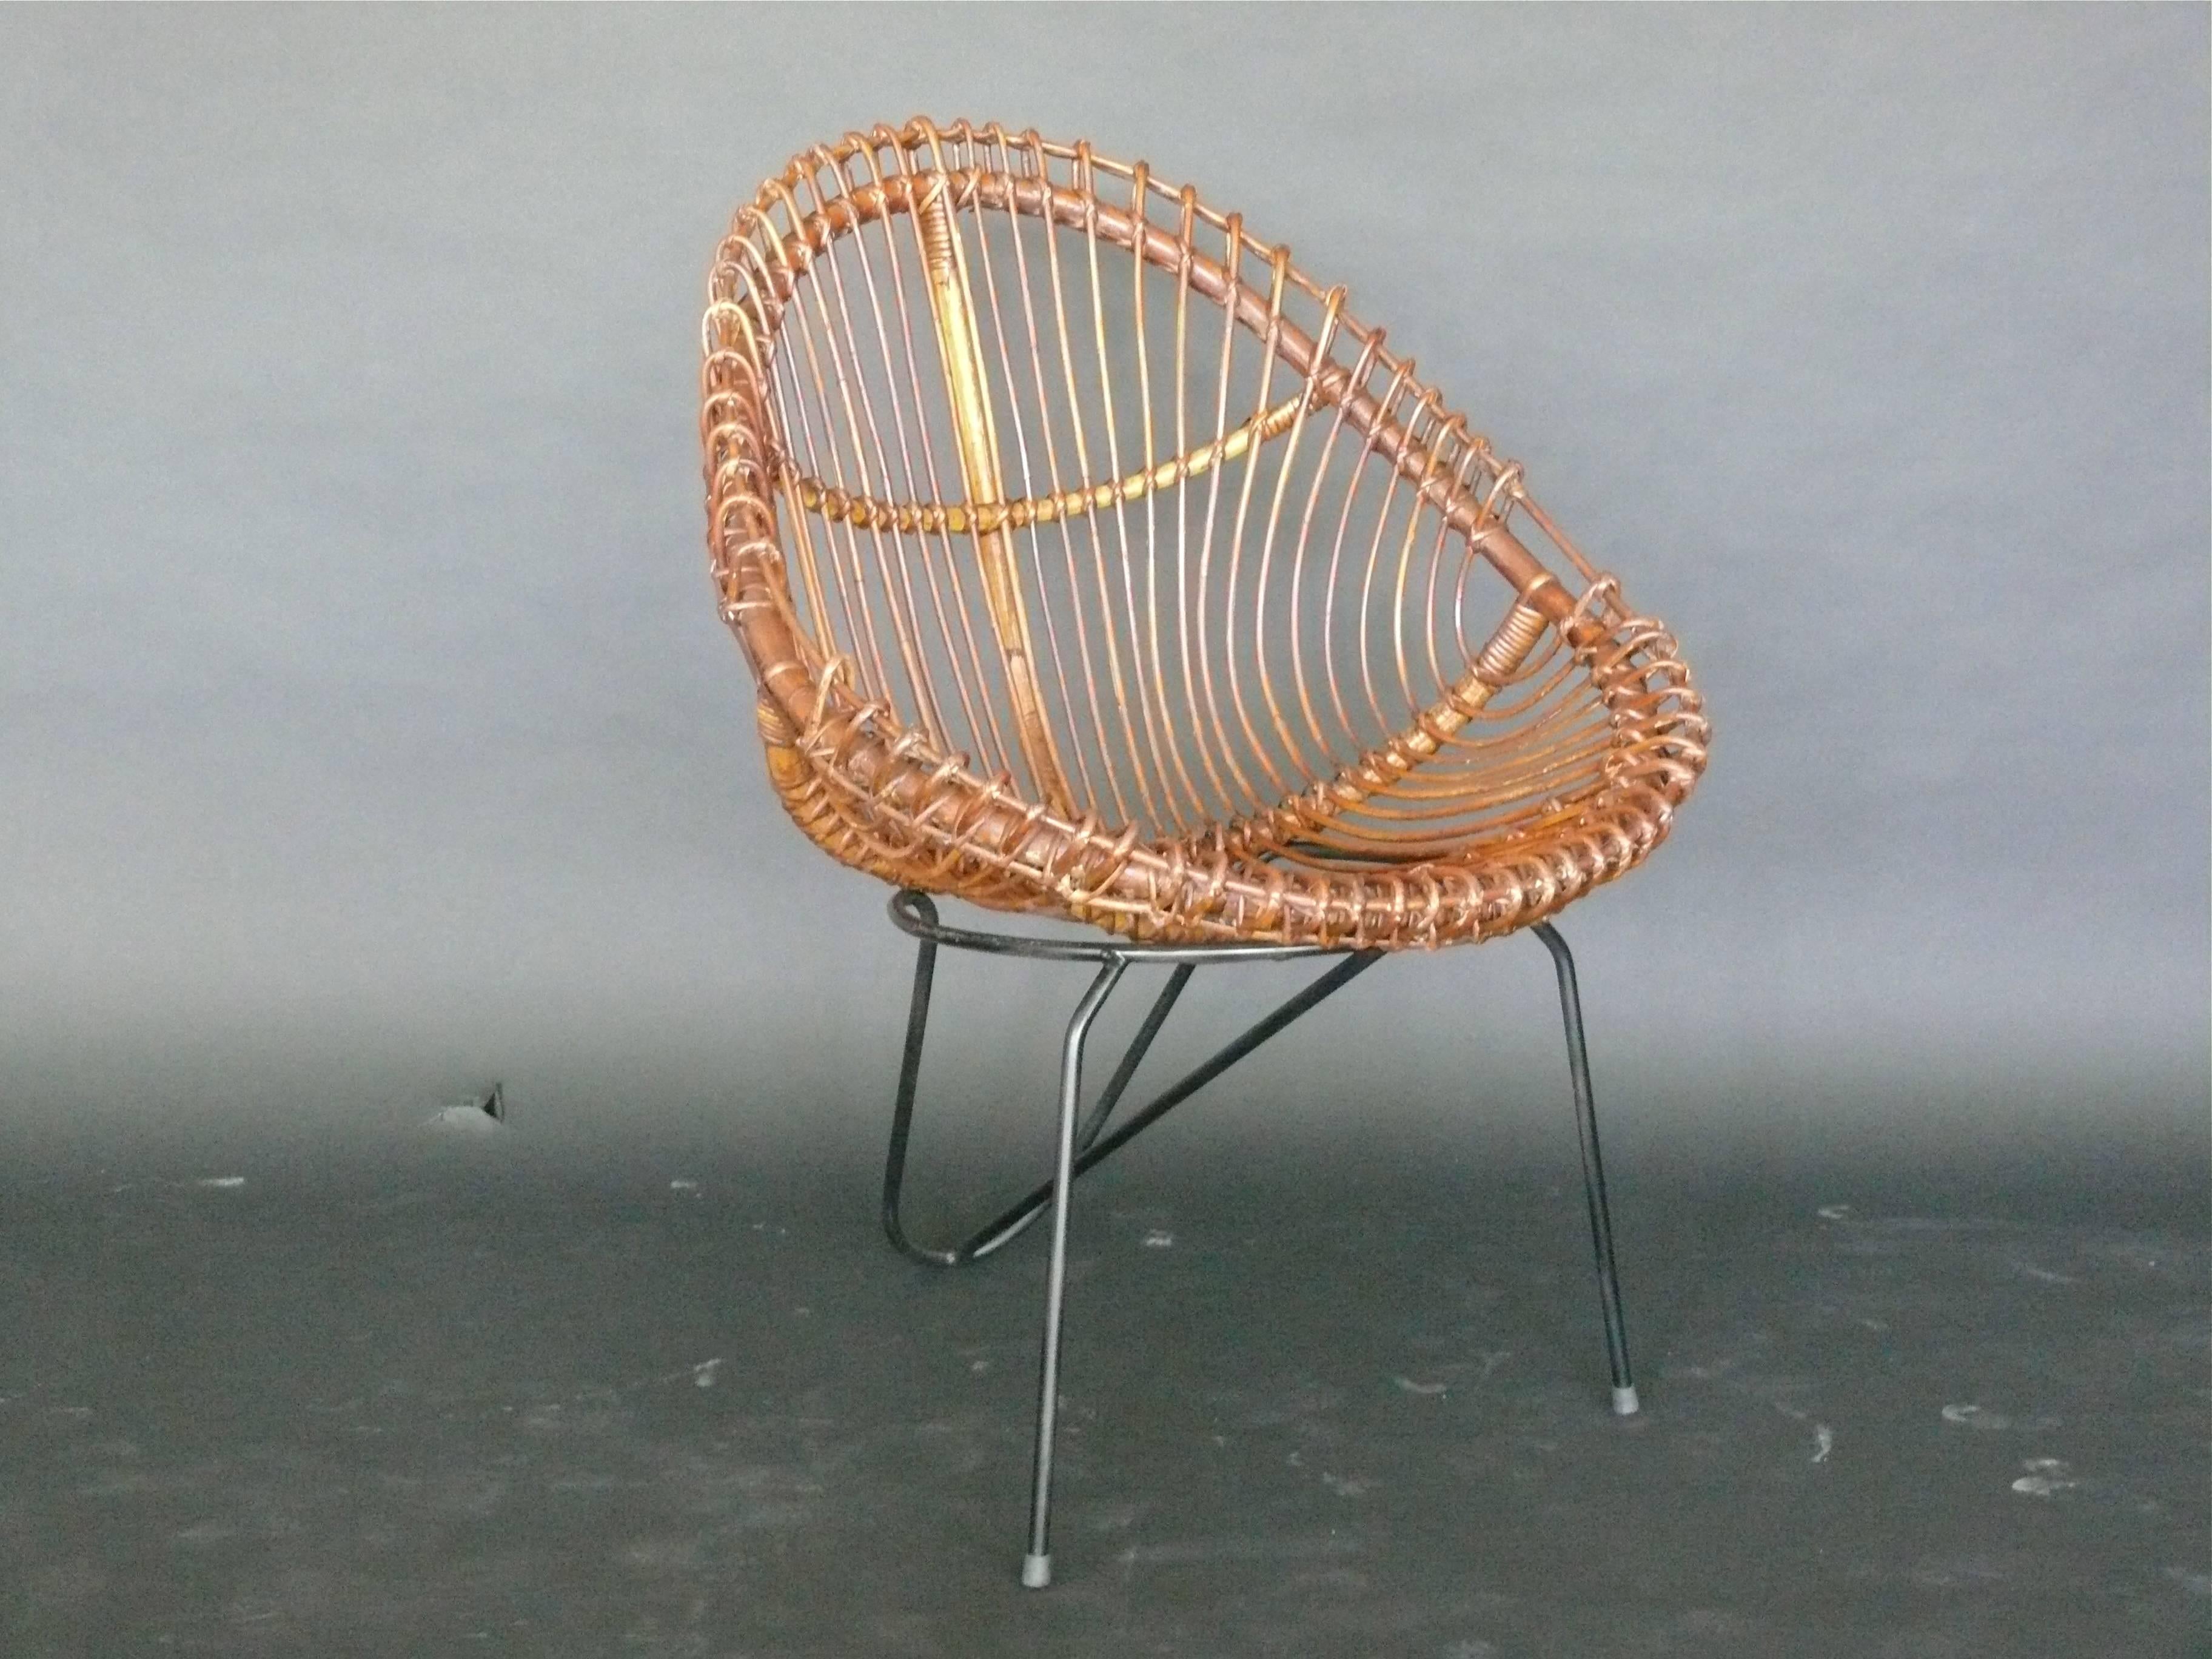 Great sculptural rattan chairs by Janine Abraham and Dirk Jan Rol. Scoop bucket seat with black iron hairpin legs. Fantastic design. Very unique. Two pairs available. Priced as a pair.